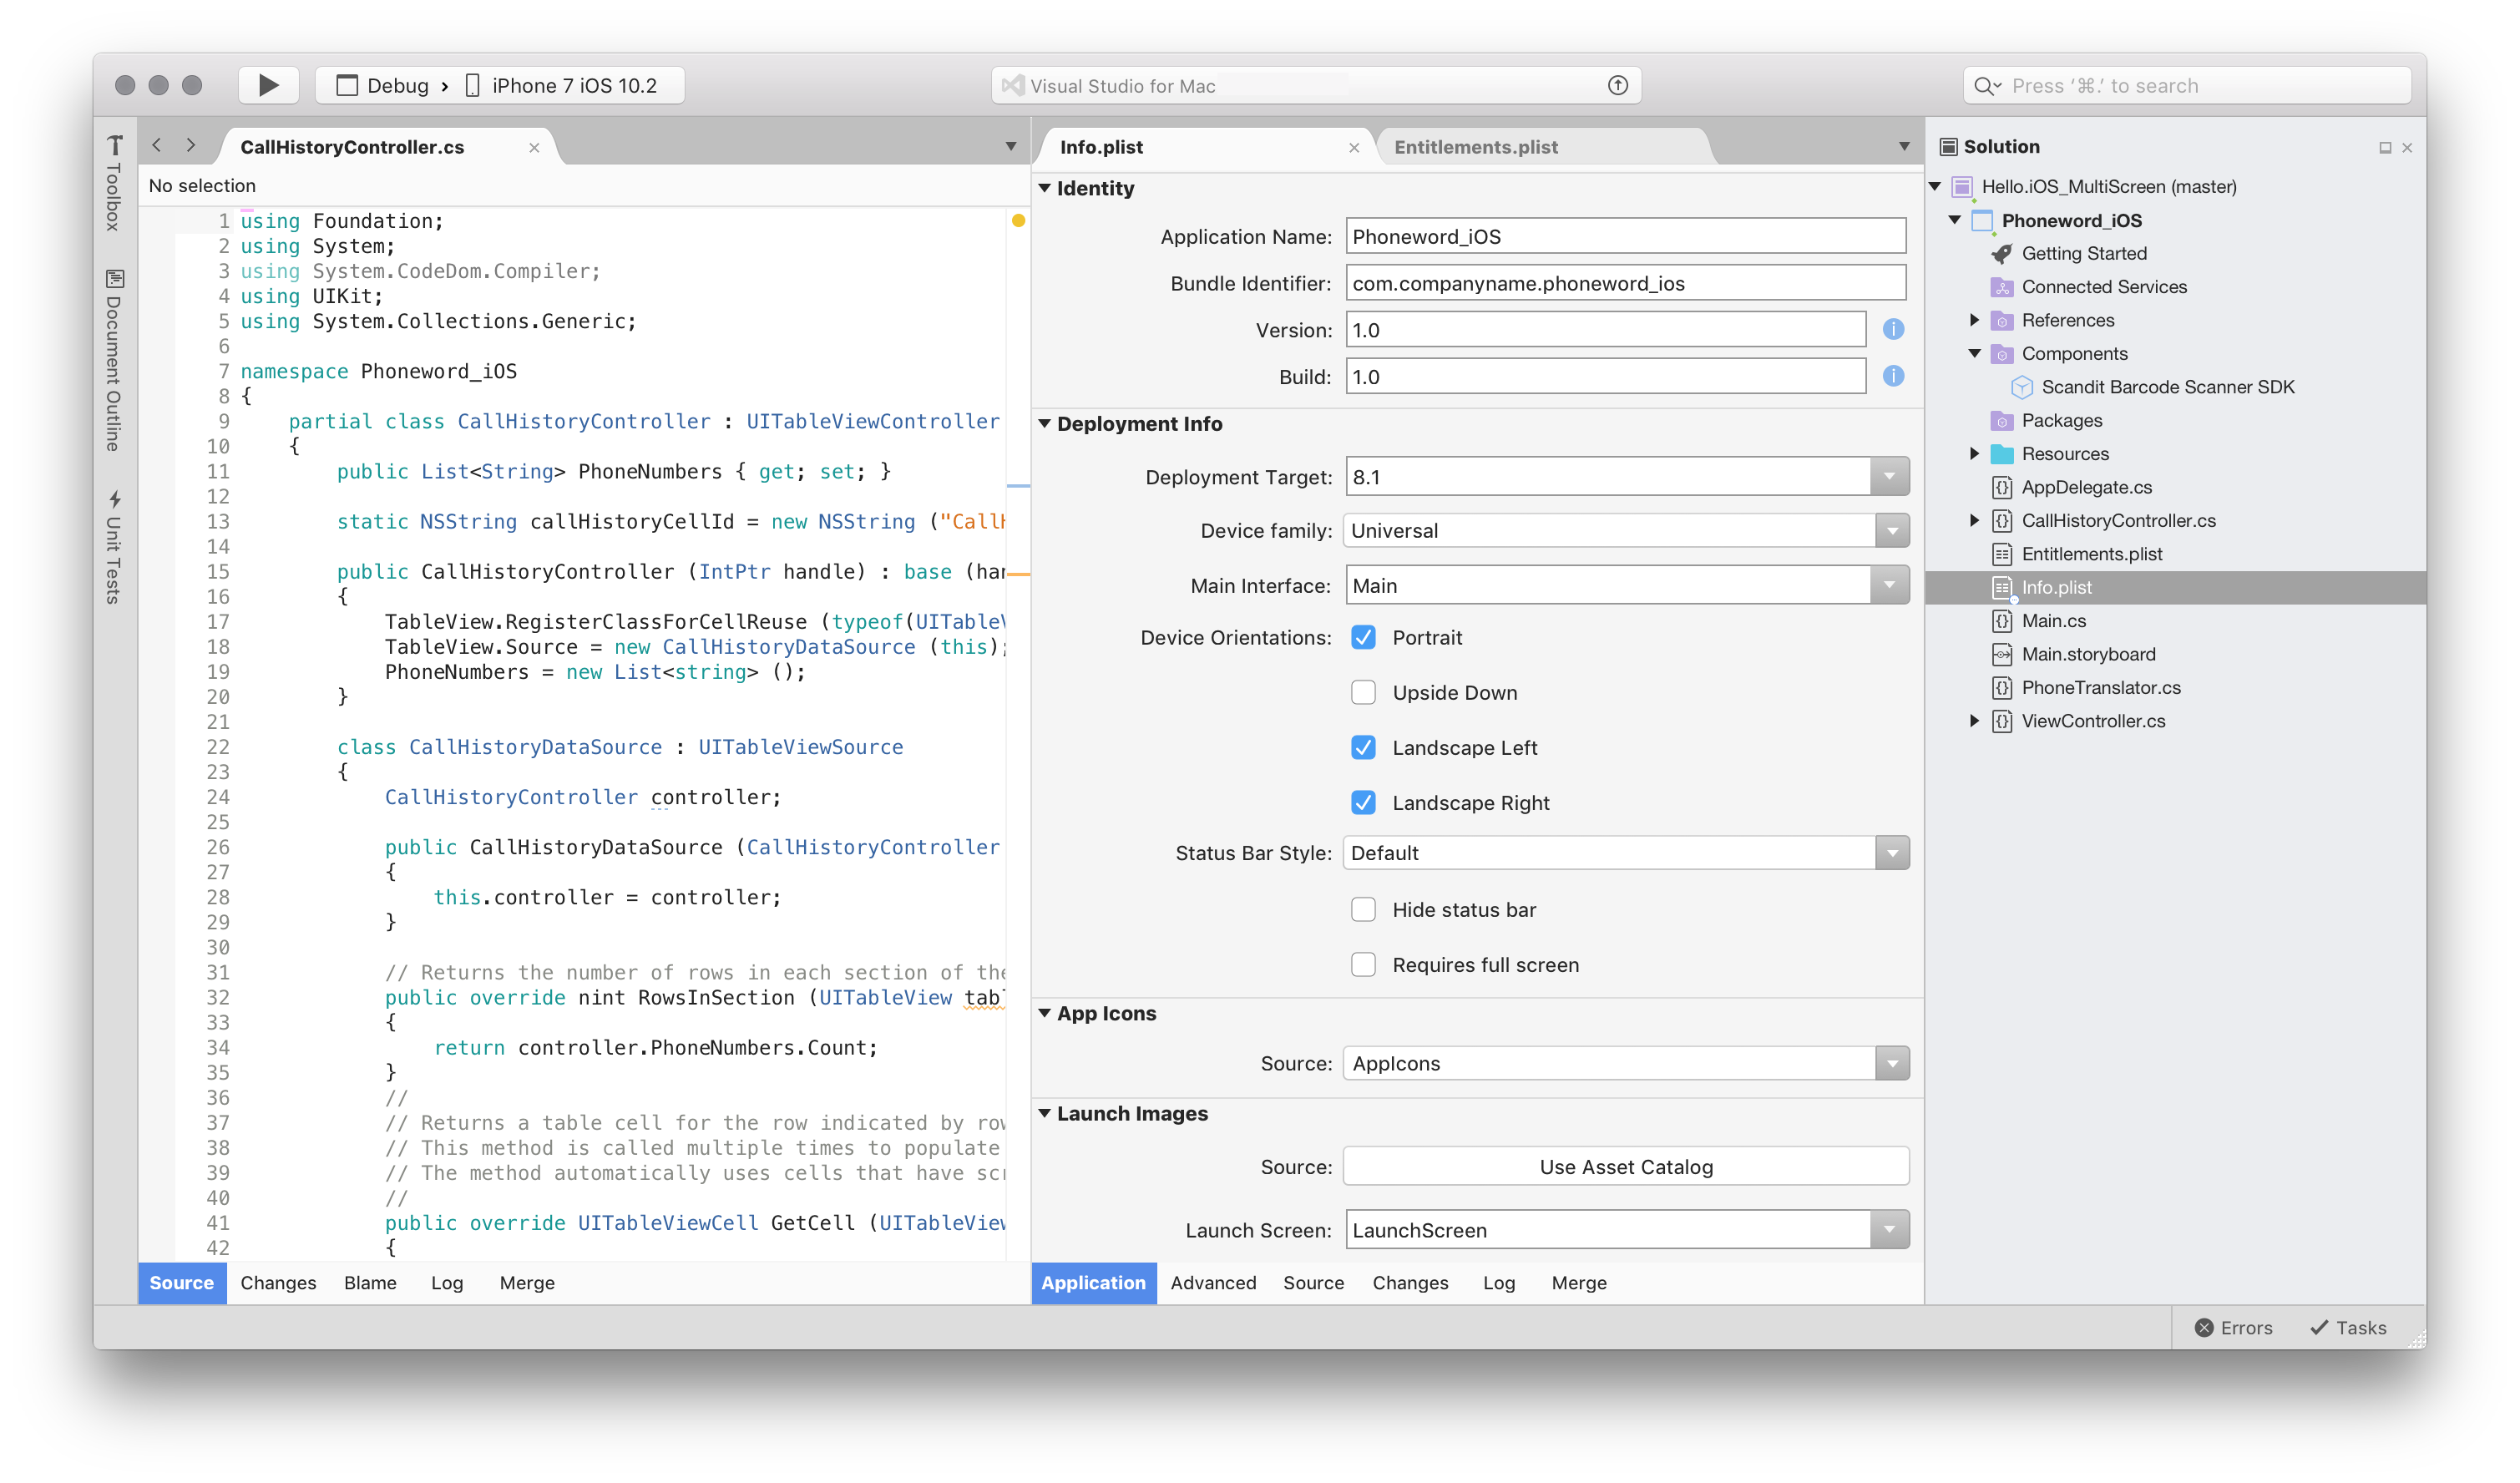 what is the equvialent for visual studio for mac